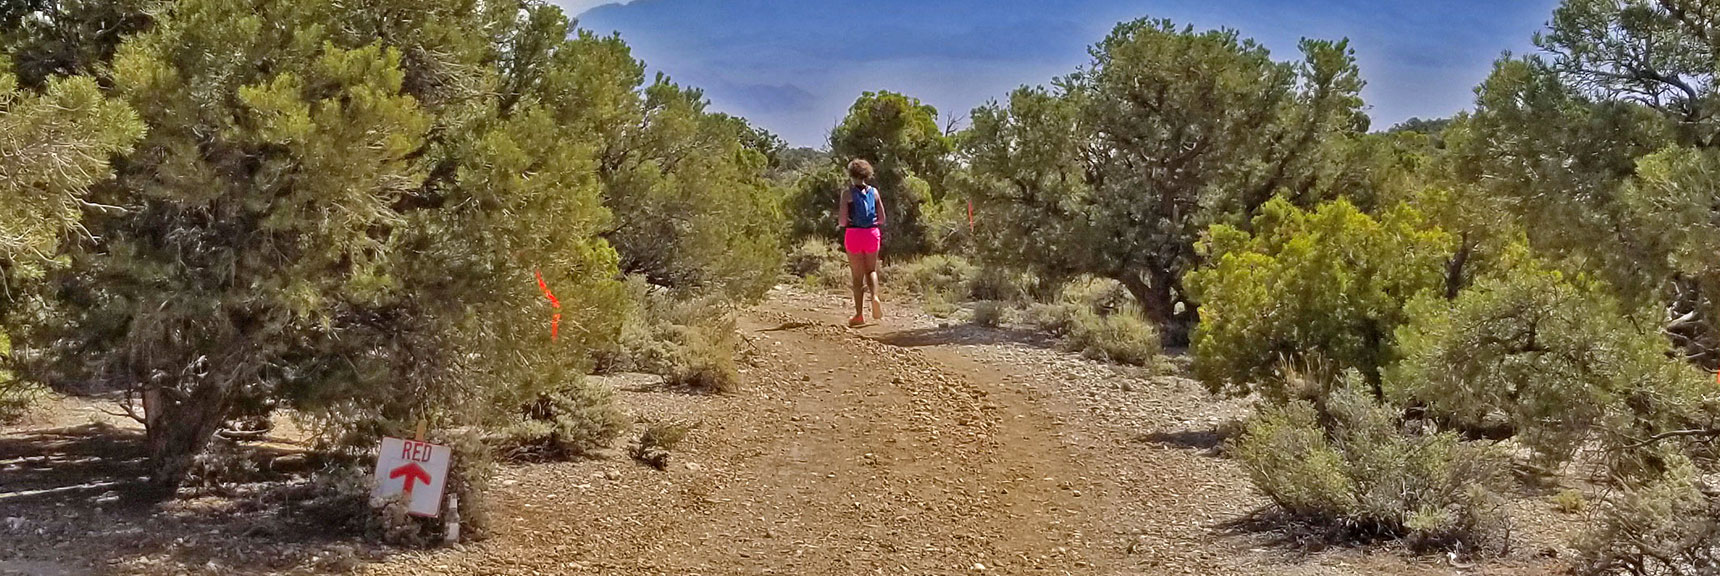 Sawmill Relay Runner and Temporary One-Day Trail Marker. | Pinyon Pine Loop Trail | Sawmill Trailhead | Lee Canyon | Mt Charleston Wilderness | Spring Mountains, Nevada